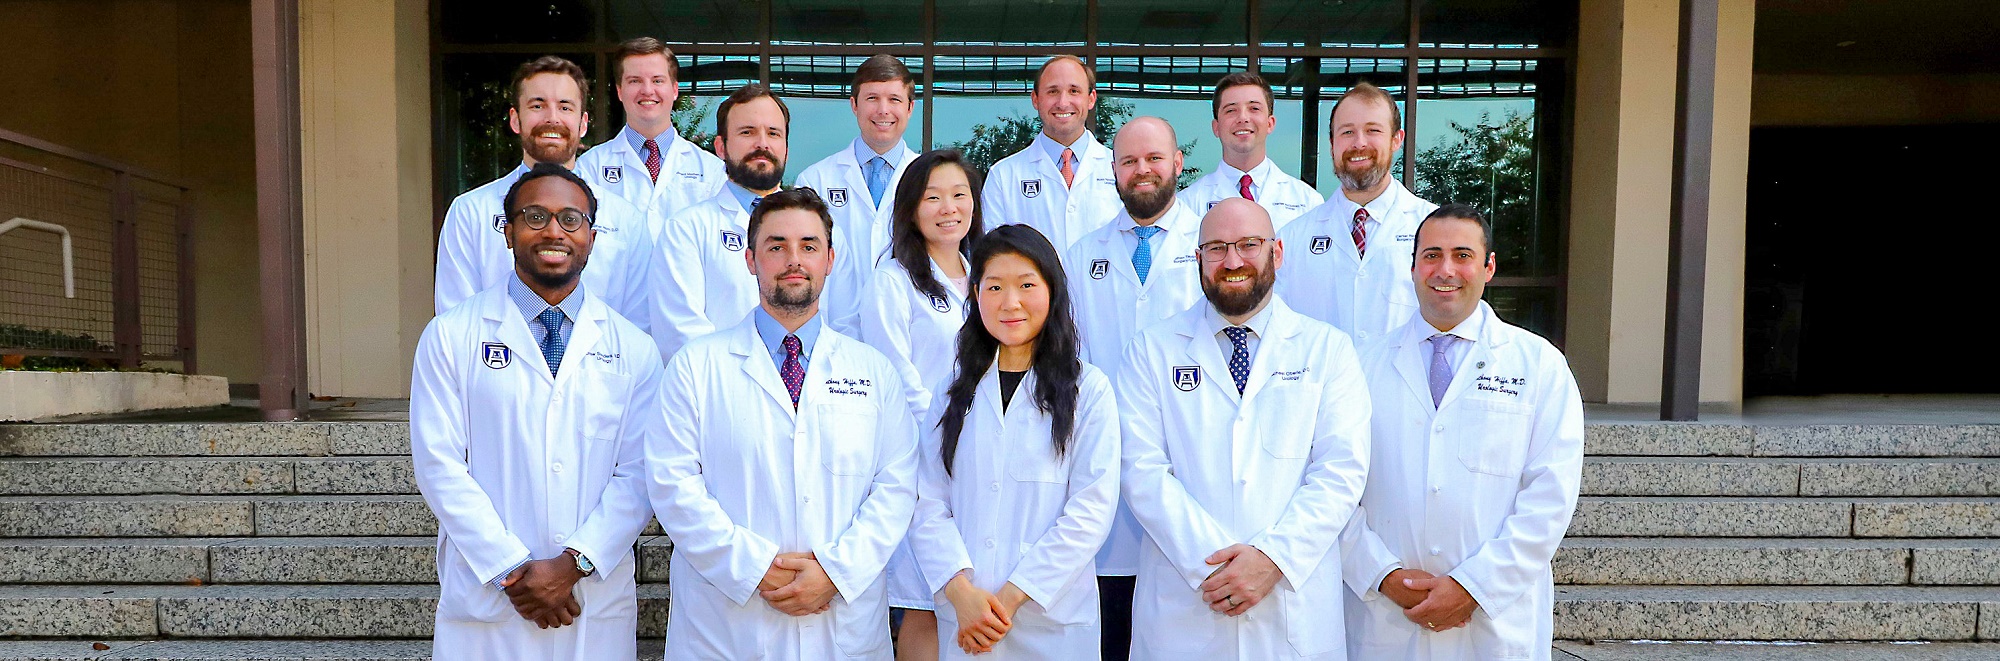 2023 Urology residents pose for picture